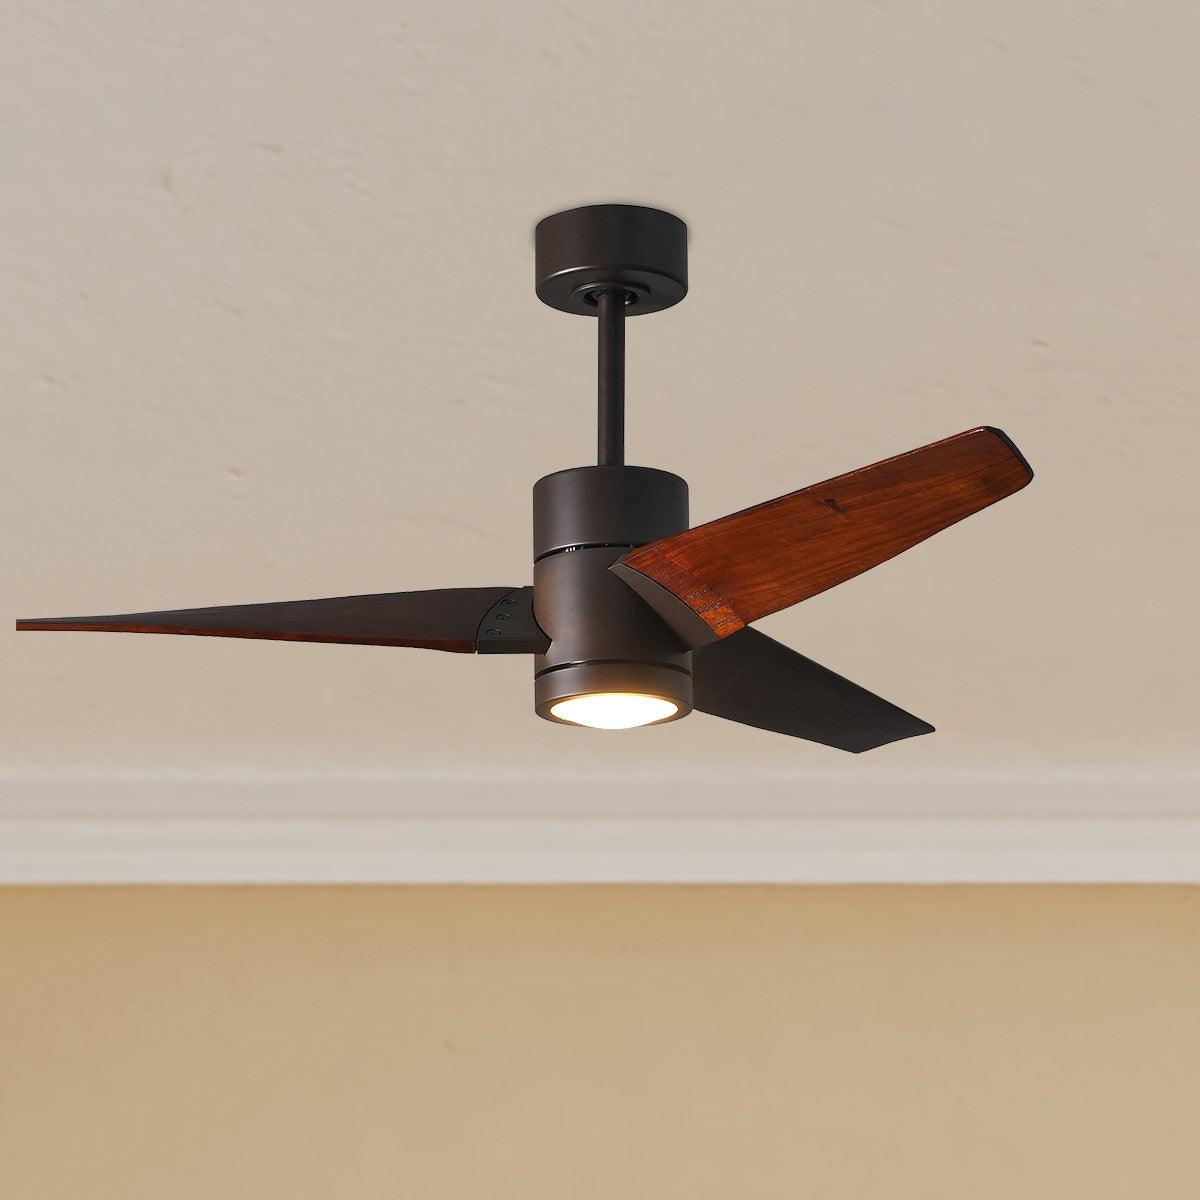 Super Janet 52 Inch Outdoor Ceiling Fan With Light, Wall And Remote Control Included